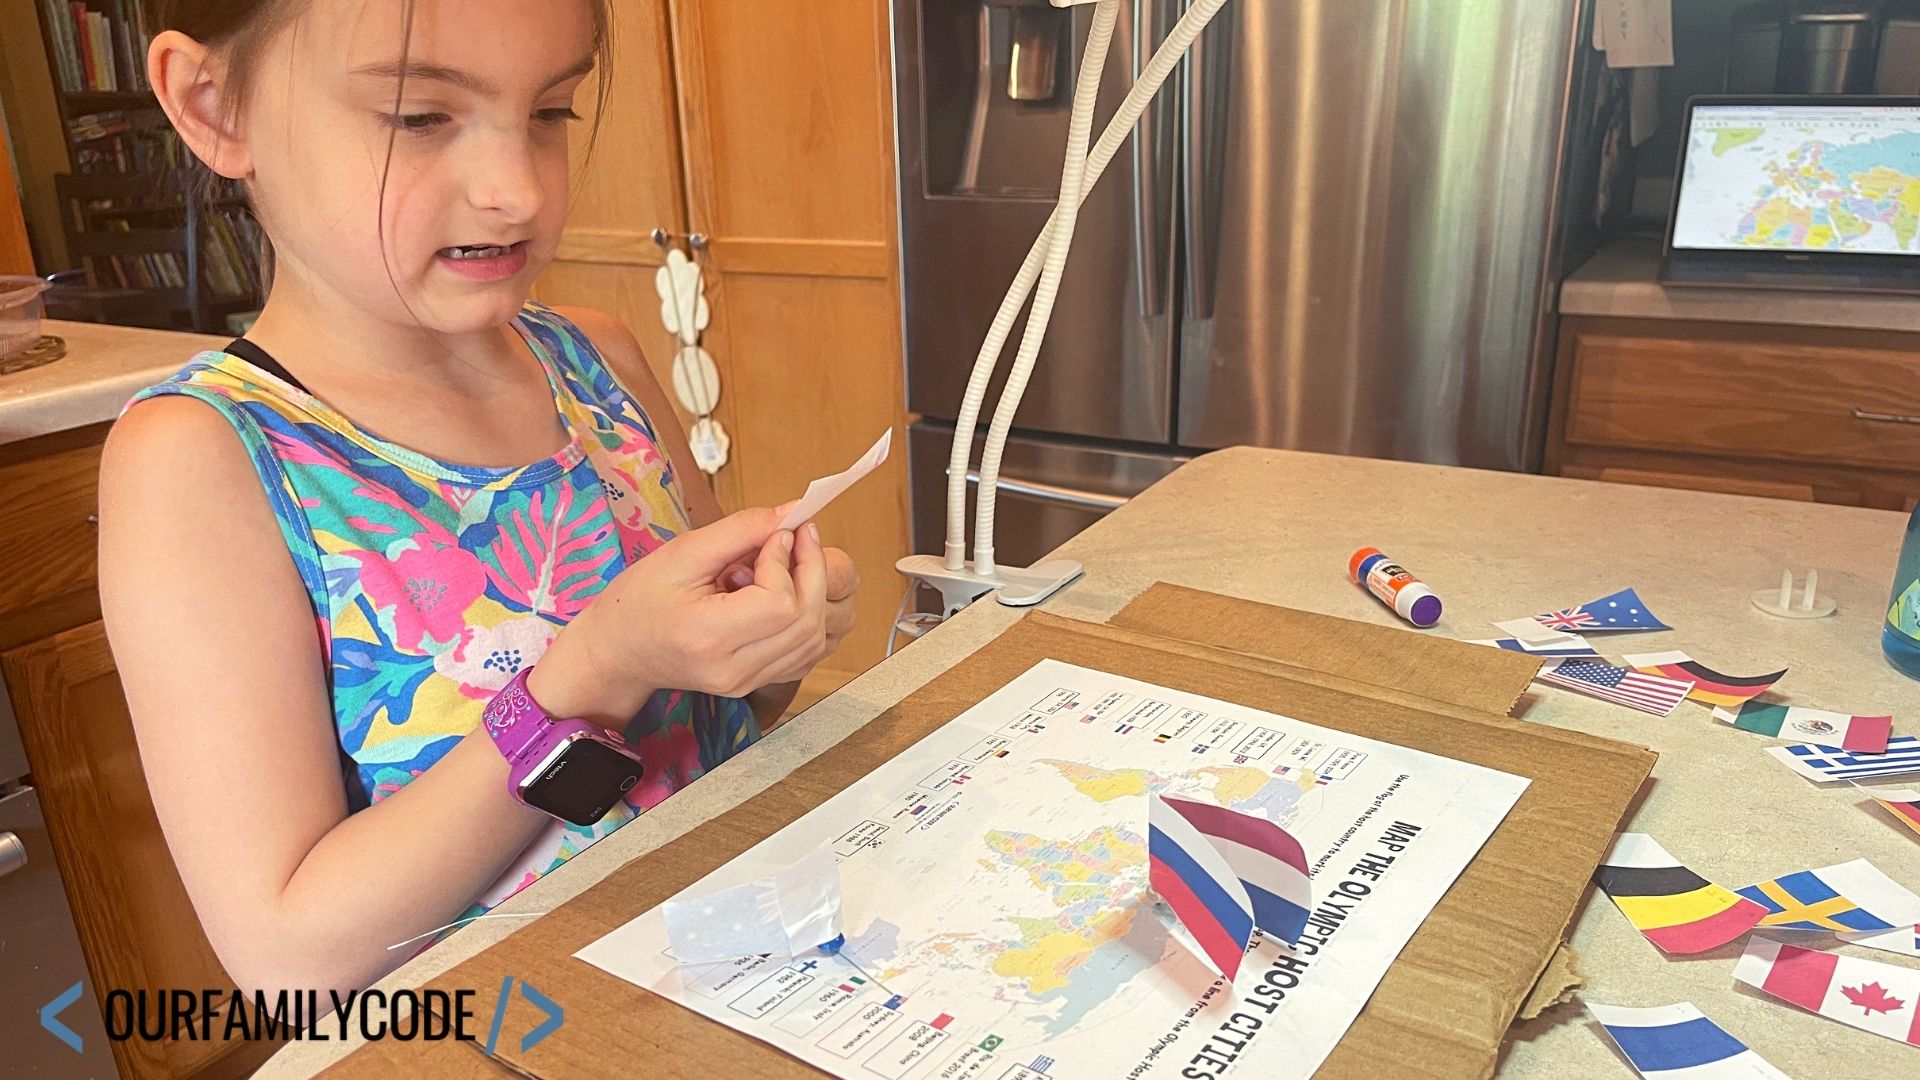 A picture of a child marking Olympic host cities on a printed map with cardboard underneath it and printed national flags made into map markers.